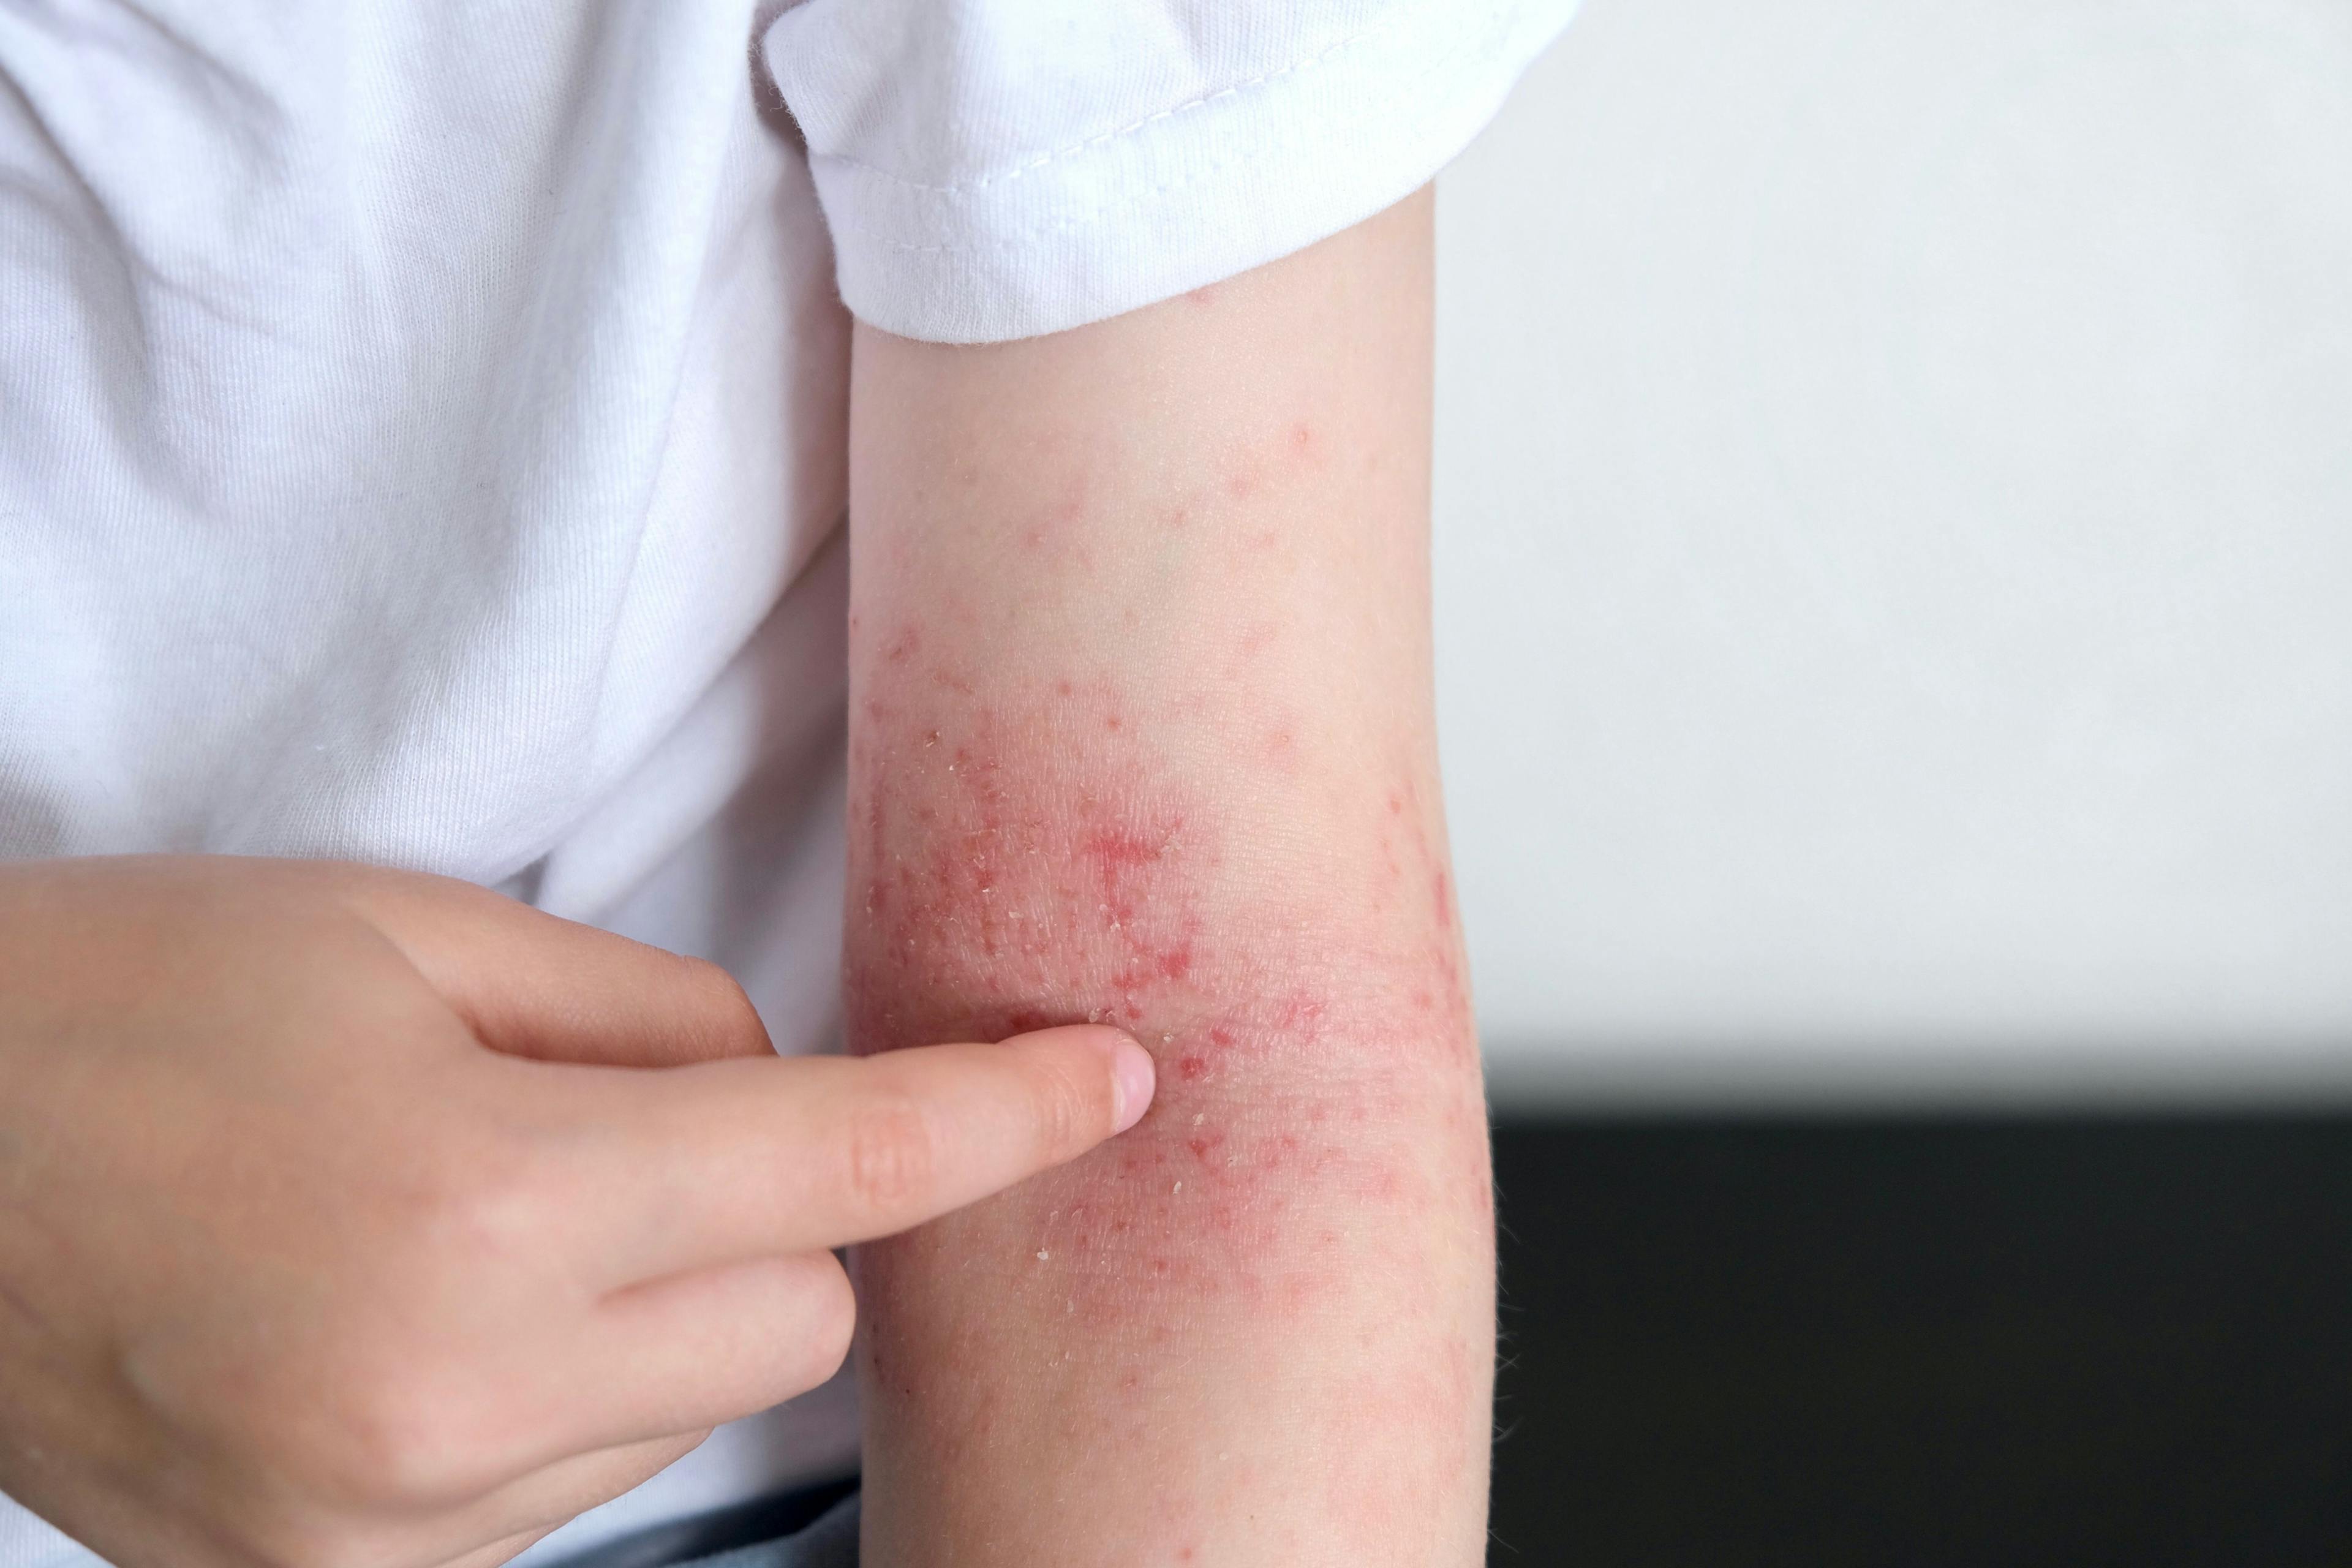 Abrocitinib Did Not Impact Immune Responses to Vaccination in Adolescents With Atopic Dermatitis